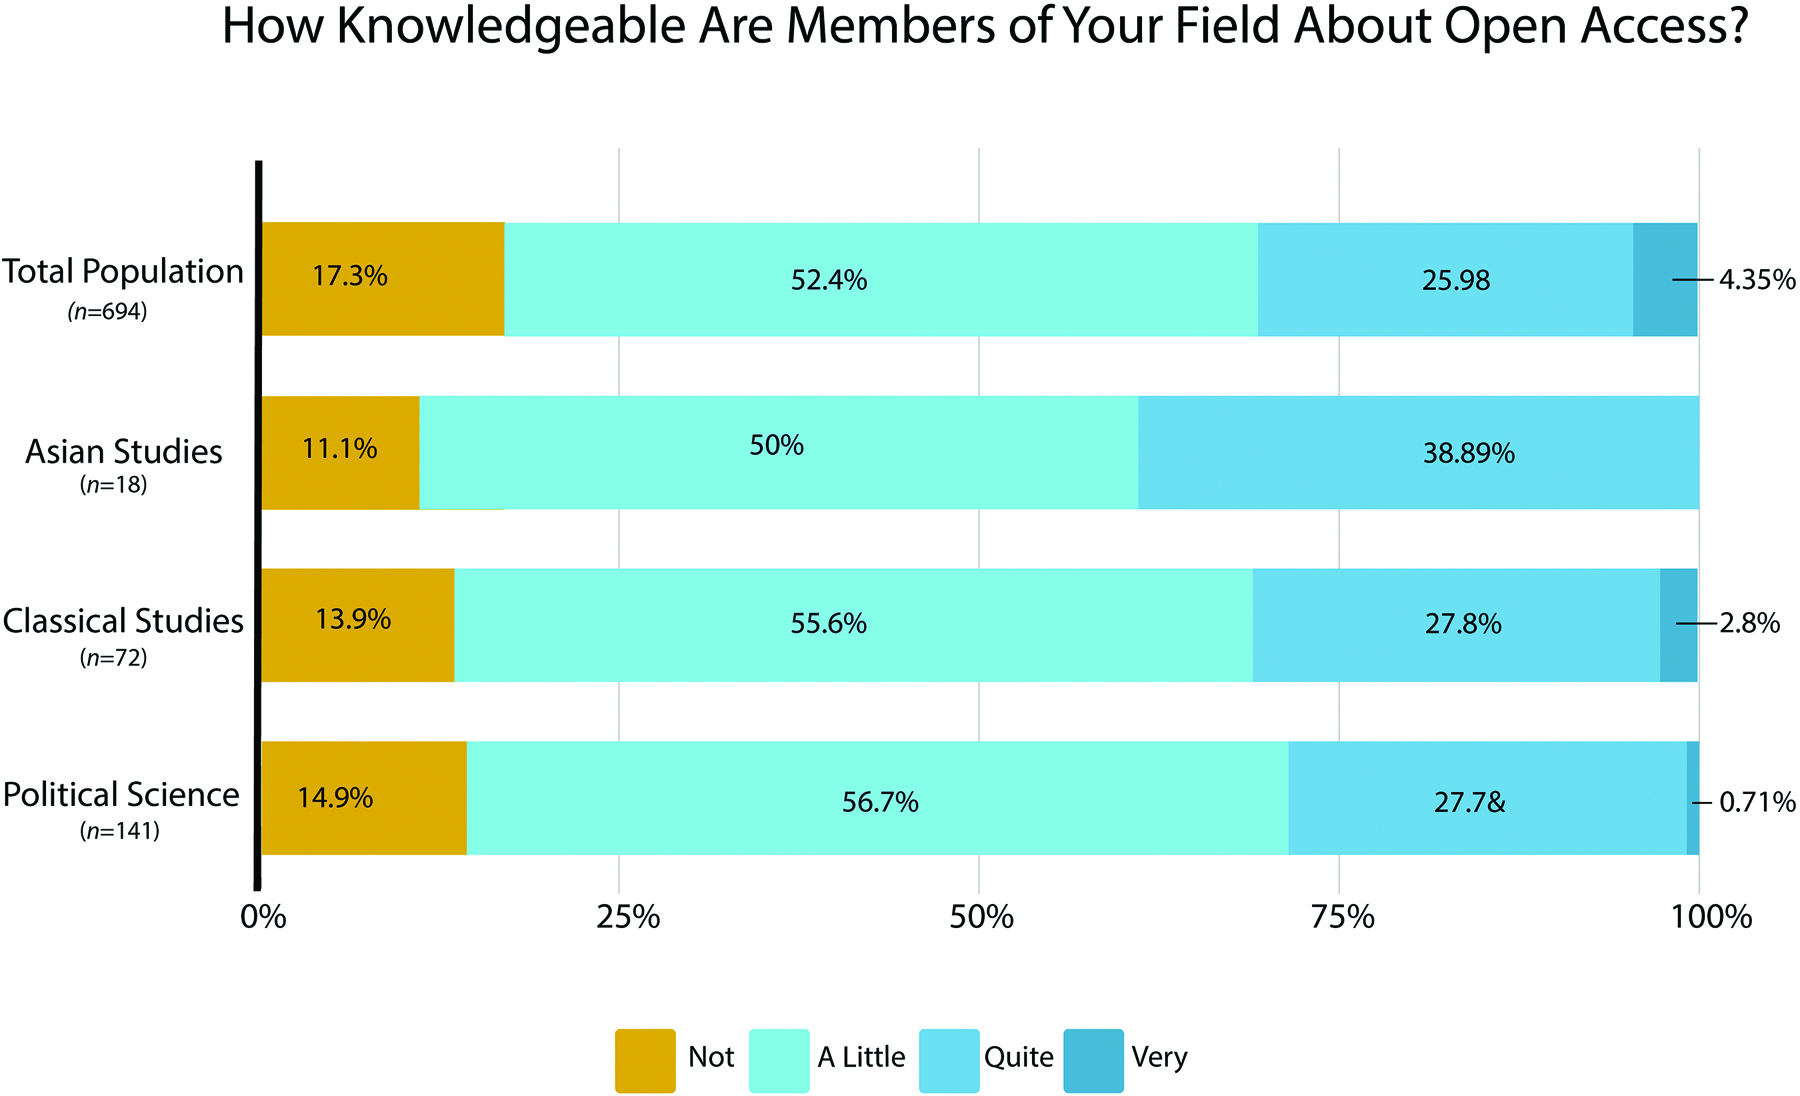 A stacked bar chart that represents answers to the question “How knowledgeable are members of your field about open access?” Each bar represents a single academic field and is 100% in total. For the total population (where n=694), the answer for “not knowledgeable” is 17.3%, the answer for a little knowledgeable is 52.4%, the answer for quite knowledgeable is 25.98%, and the answer for very knowledgeable is 4.35%. For Asian Studies (where n = 18), the answer for “not knowledgeable” is 11.1%, the answer for a little knowledgeable is 50%, the answer for quite knowledgeable is 38.89%. For Classical Studies (where n=72), the answer for “not knowledgeable” is 13.9%, the answer for a little knowledgeable is 55.6%, the answer for quite knowledgeable is 27.8%, and the answer for very knowledgeable is 2.8%. For Political Science (where n=141), the answer for “not knowledgeable” is 14.9%, the answer for a little knowledgeable is 56.7%, the answer for quite knowledgeable is 27.7%, and the answer for very knowledgeable is 0.71%.